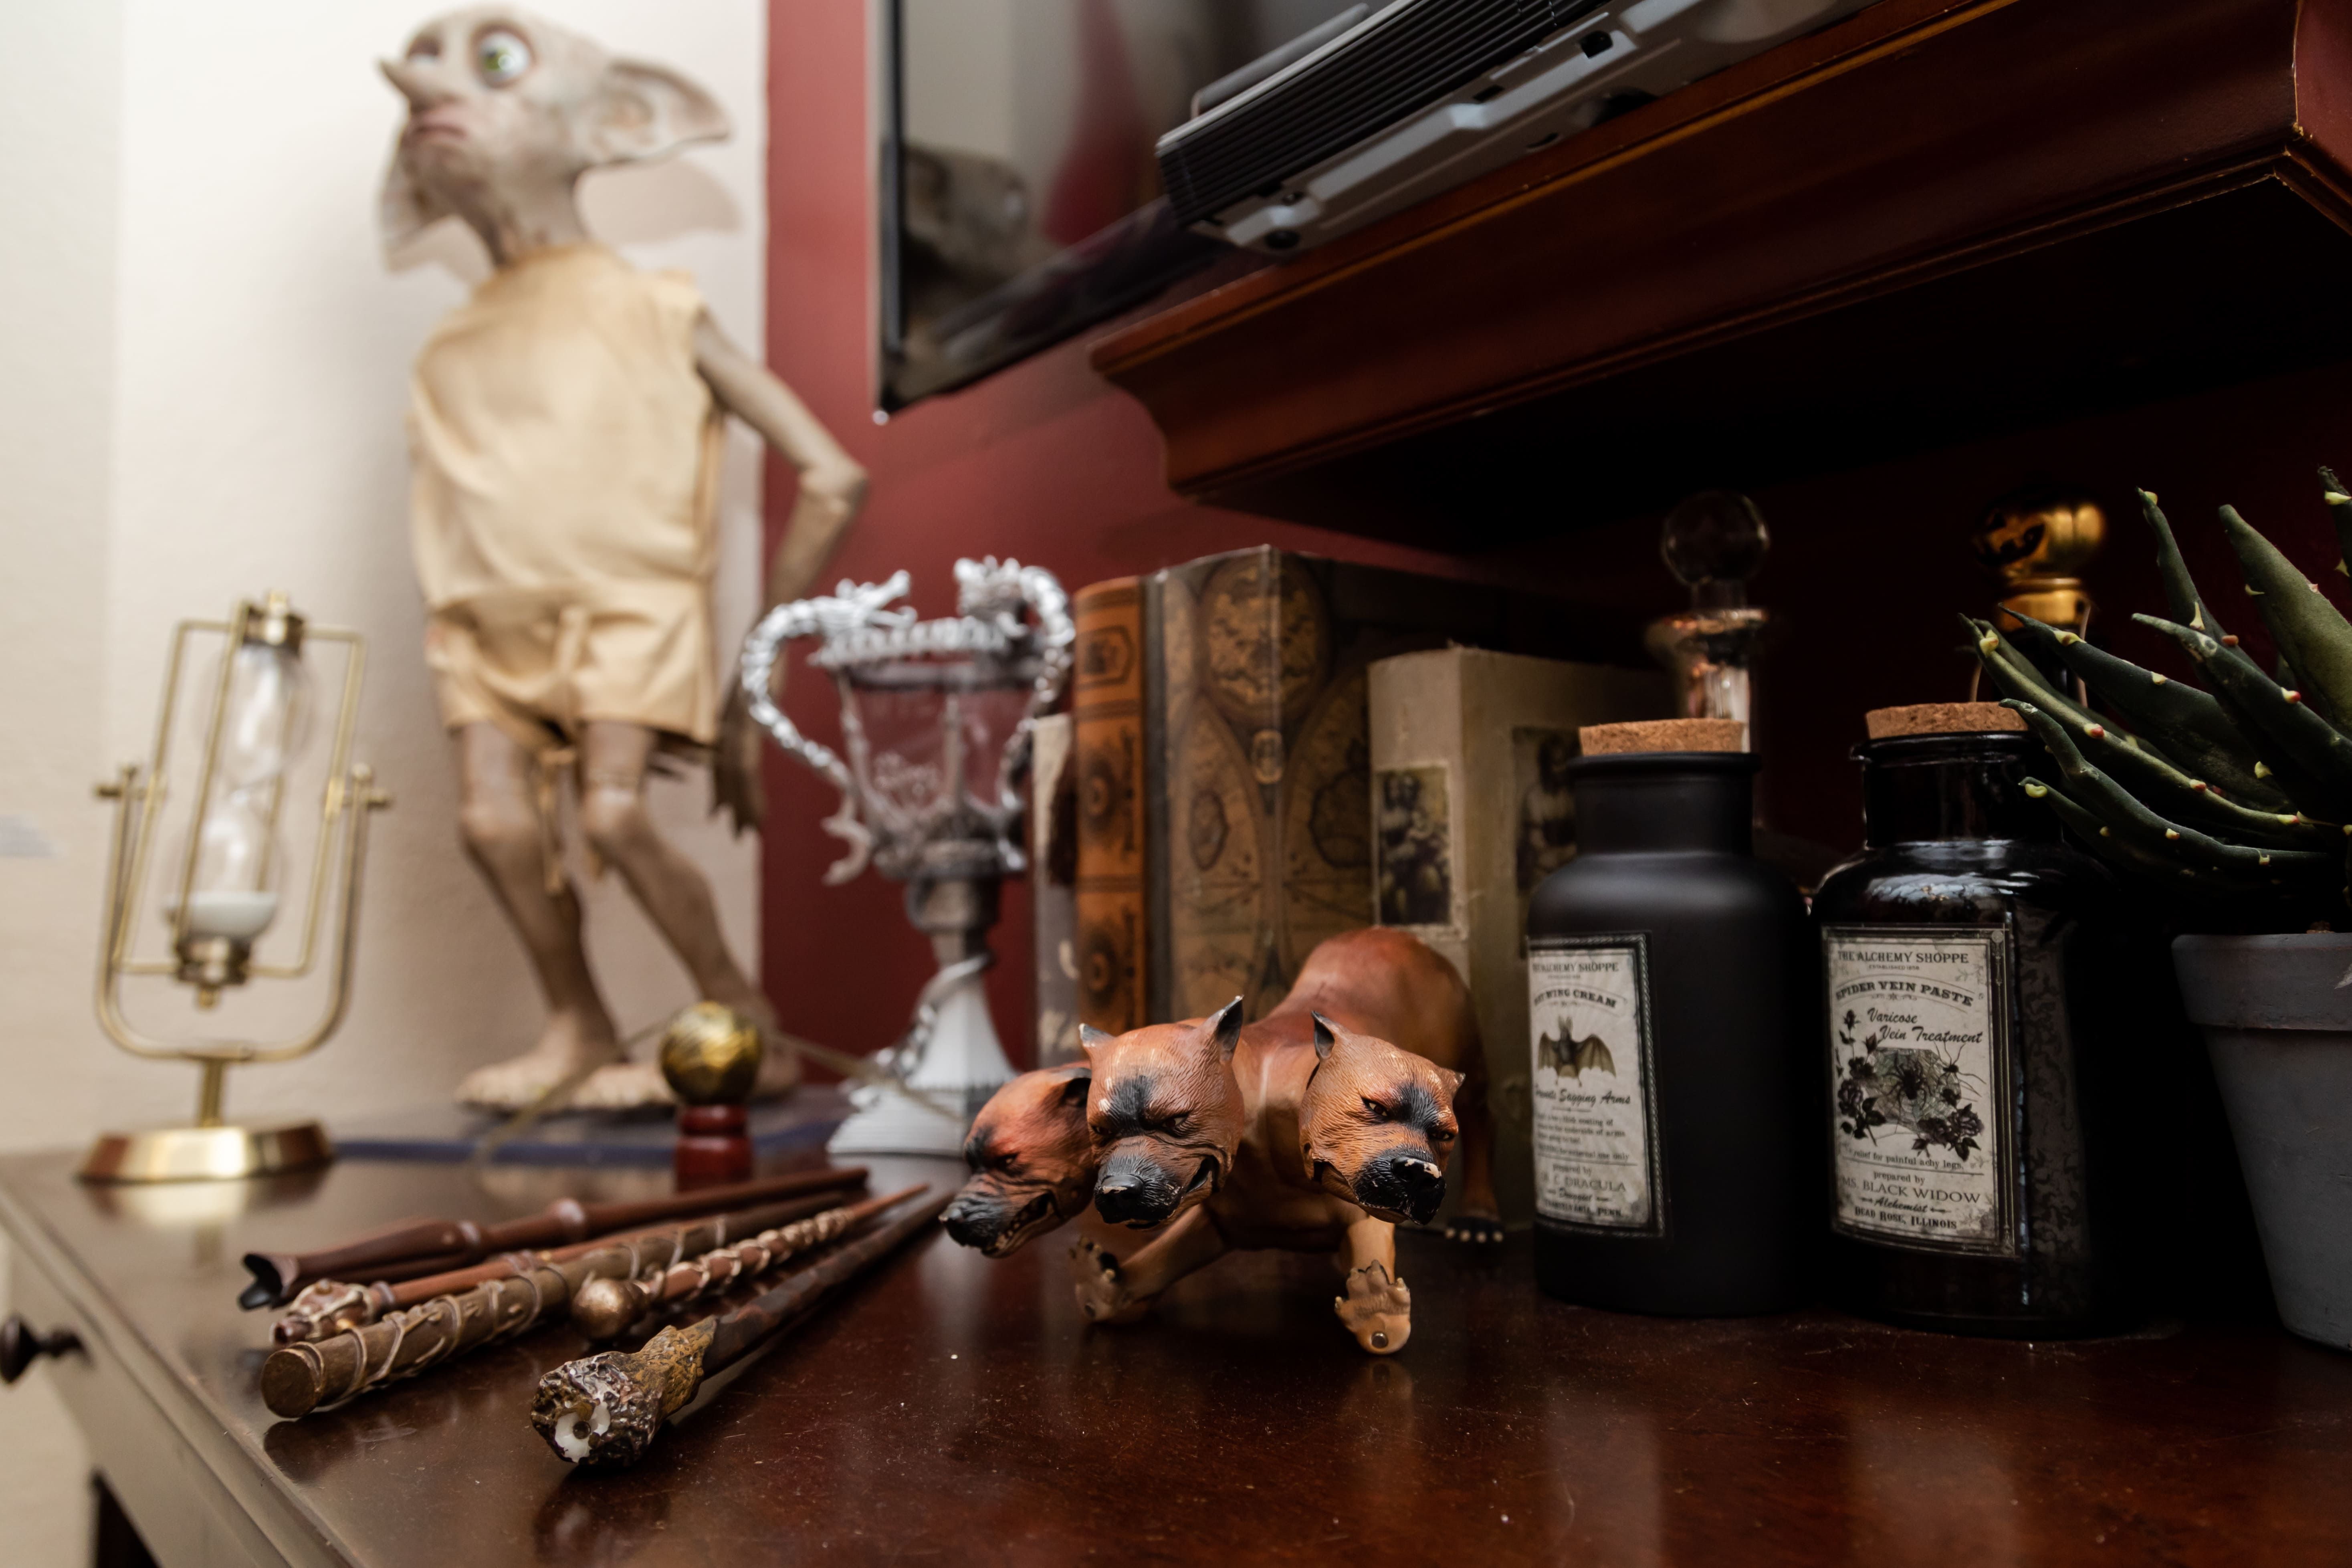 Life-sized Dobby keeps watch over Harry's potions and personal effects.